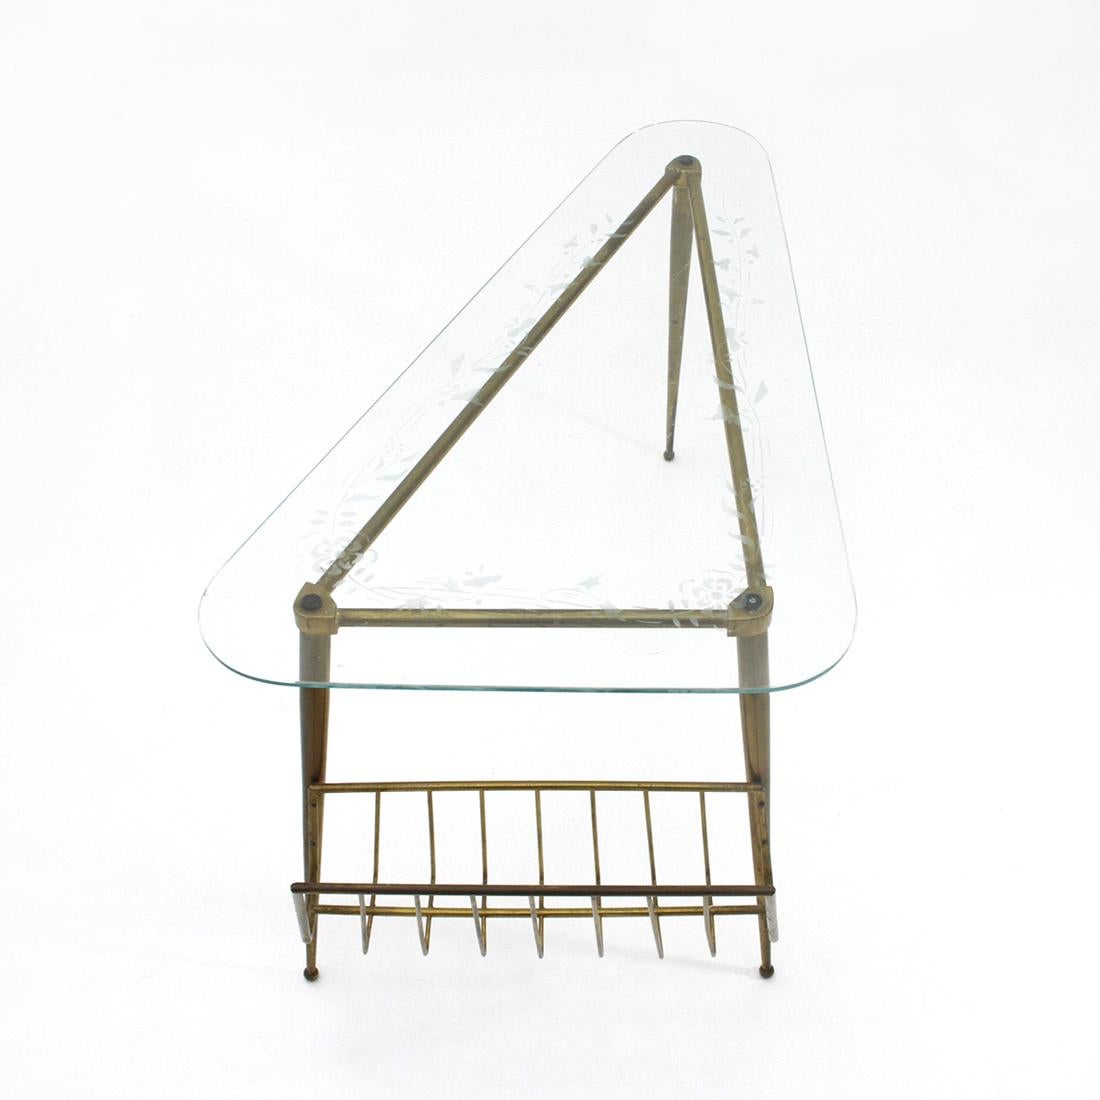 Mid-20th Century Brass and Glass Triangular Coffee Table, 1950s